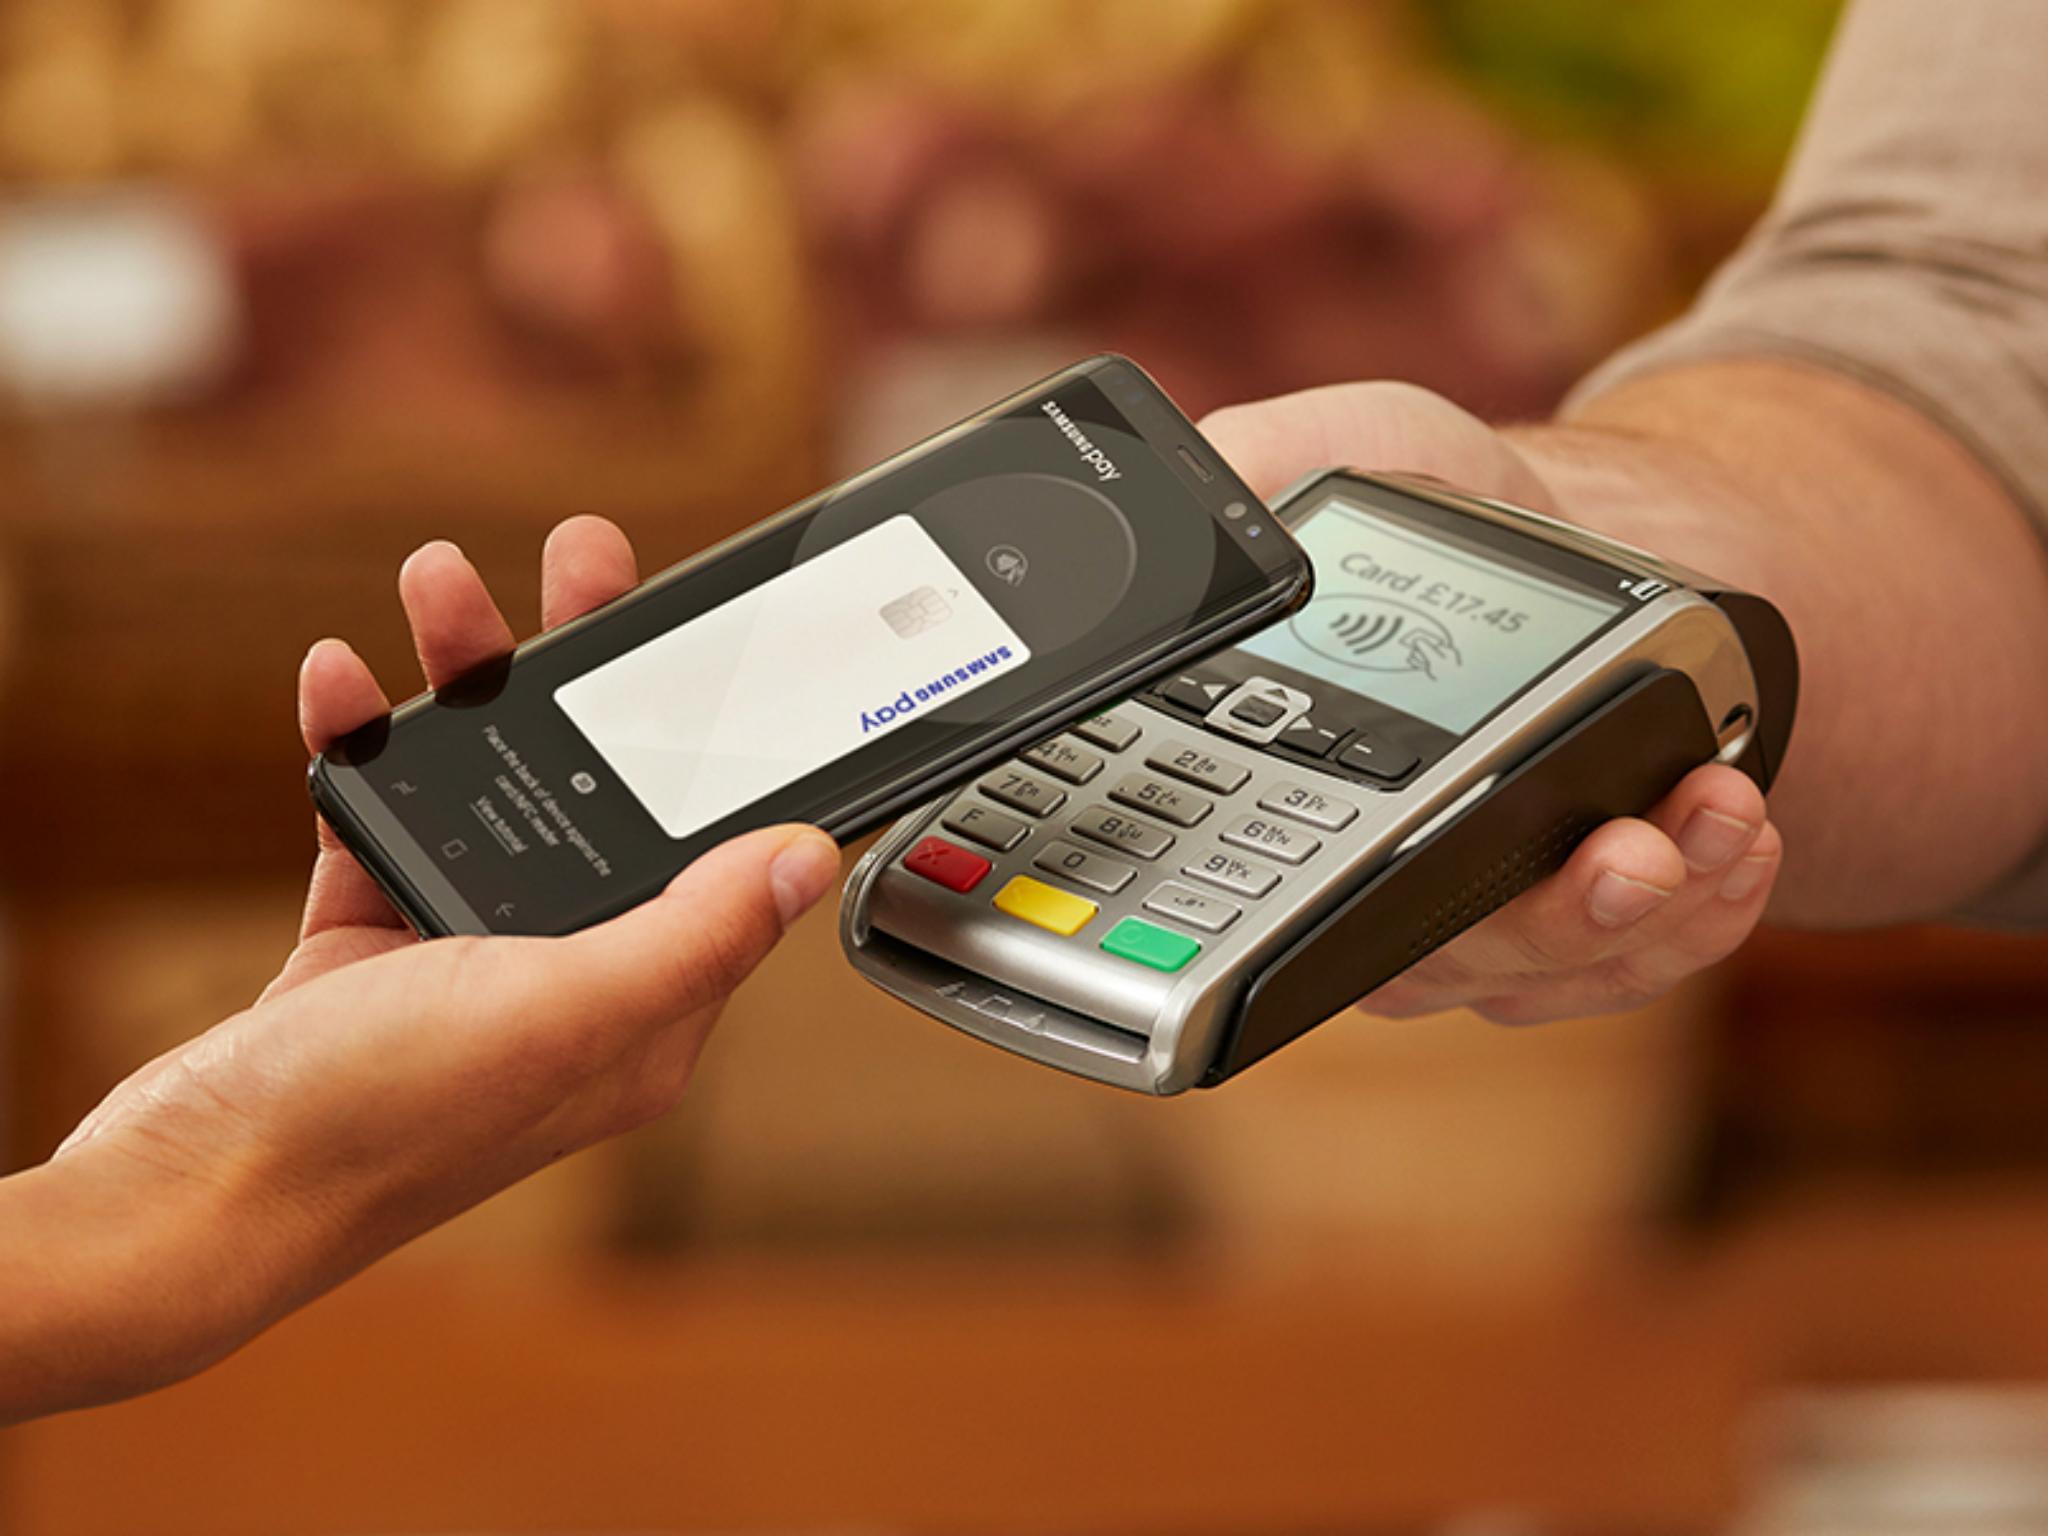 samsung-phones-can-be-used-as-payment-terminals-soon